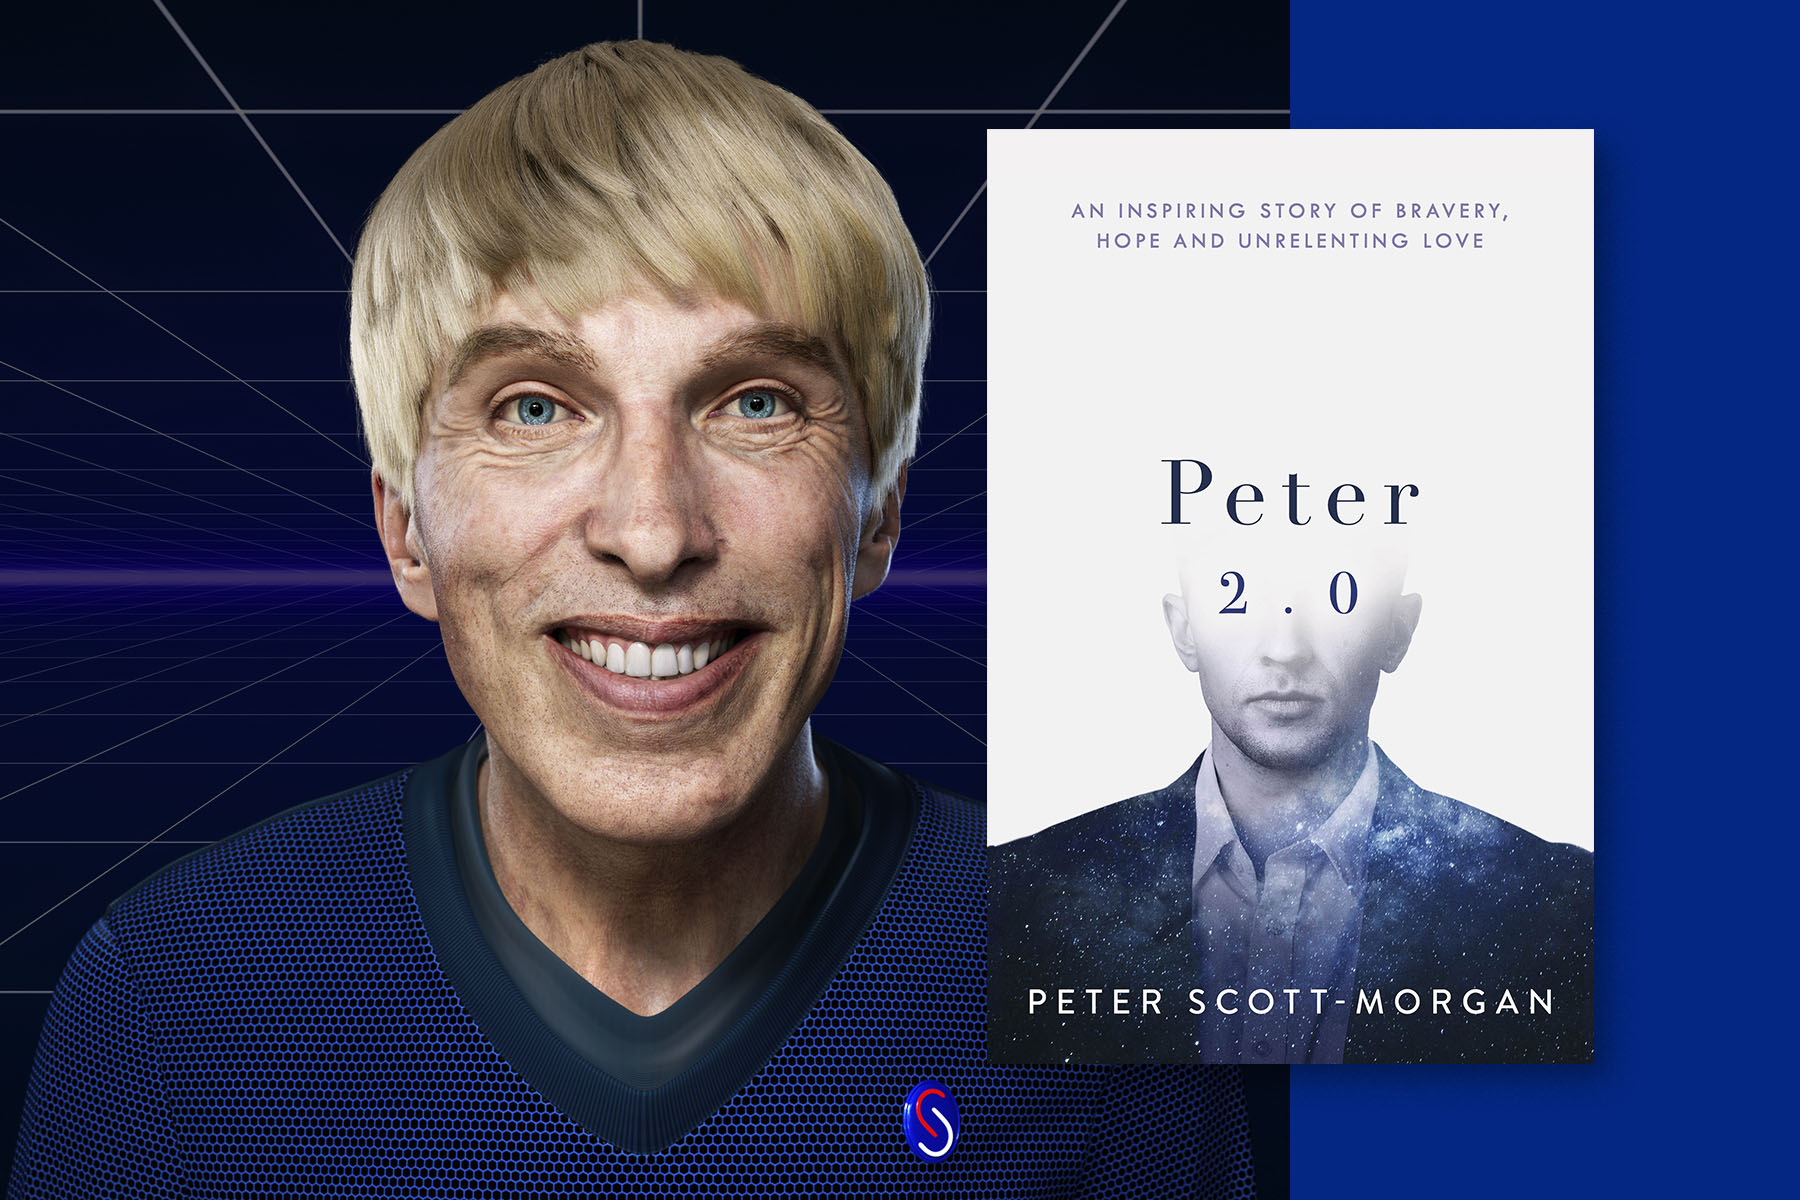 A photograph of Peter Scott-Morgan next to the cover of his book